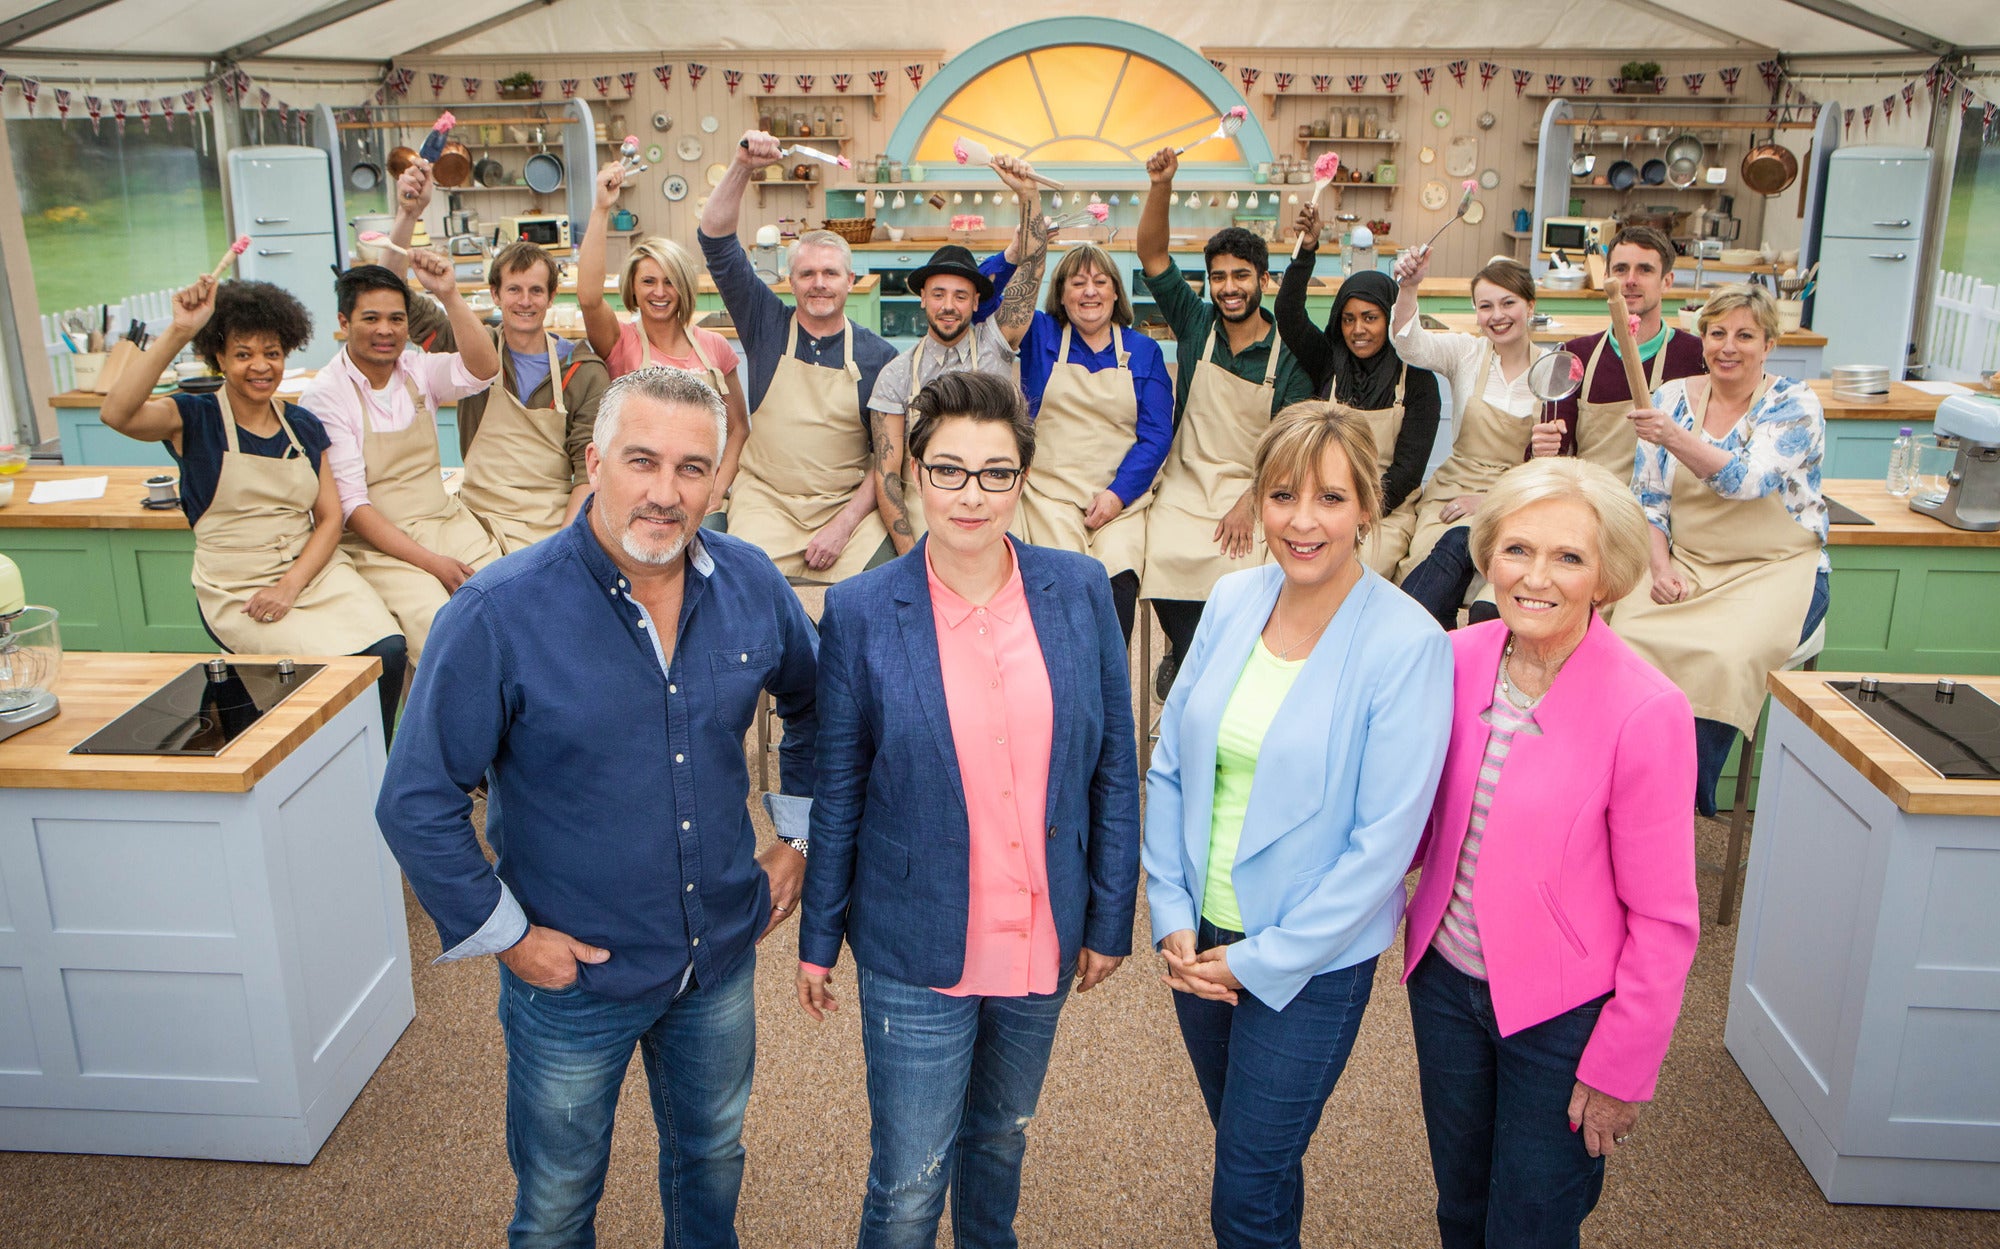 First there were 12, now there are three. Let the Bake Off final commence!